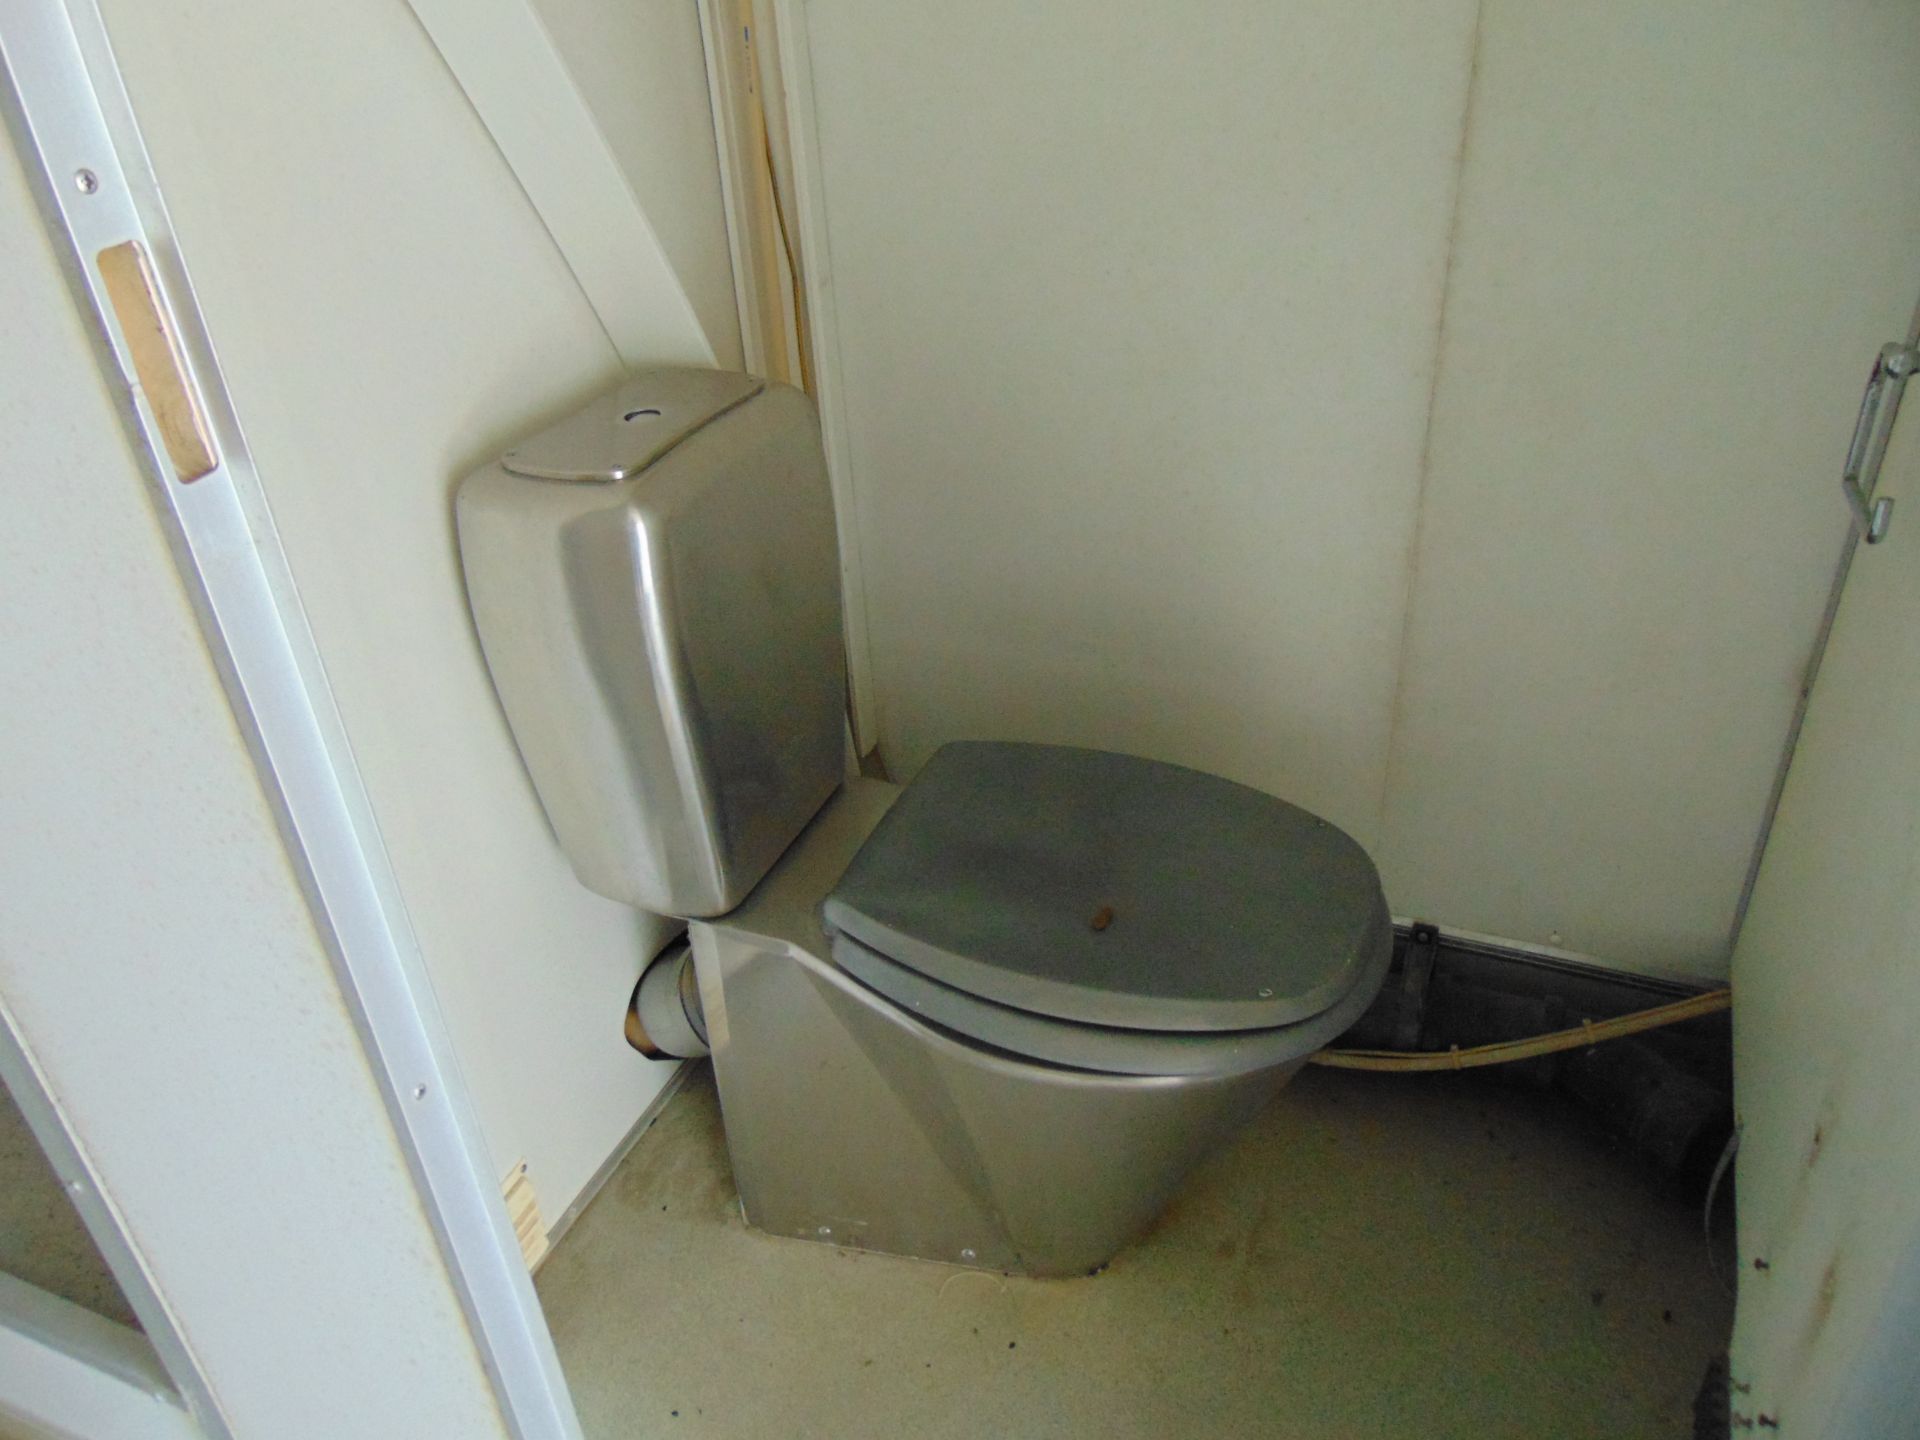 Frontline toilet and shower block units - Image 27 of 29